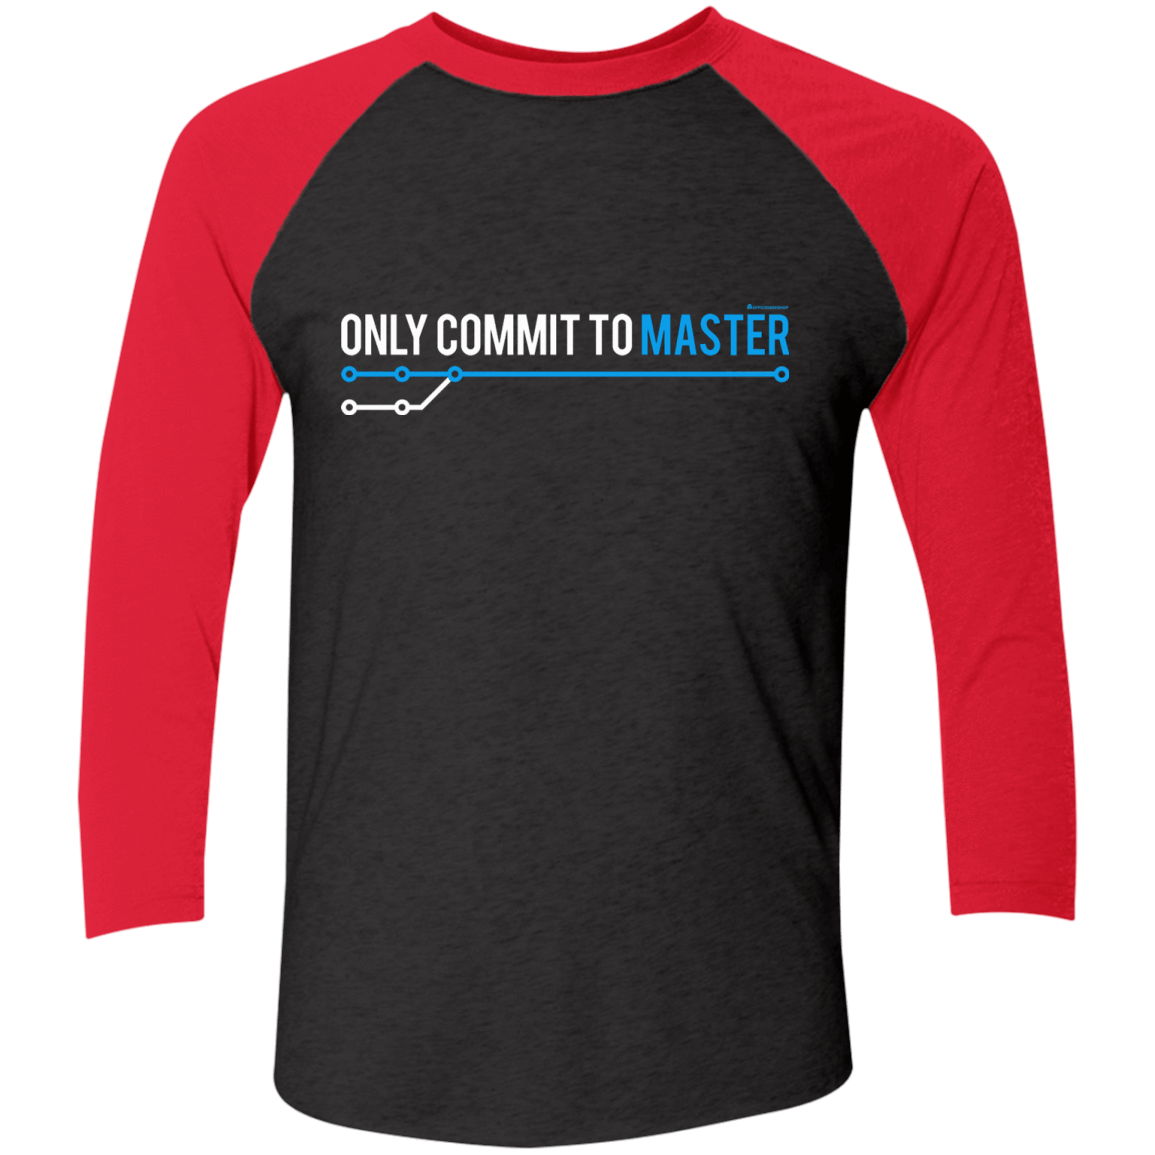 T-Shirts Vintage Black/Vintage Red / X-Small Only Commit To Master Men's Triblend 3/4 Sleeve